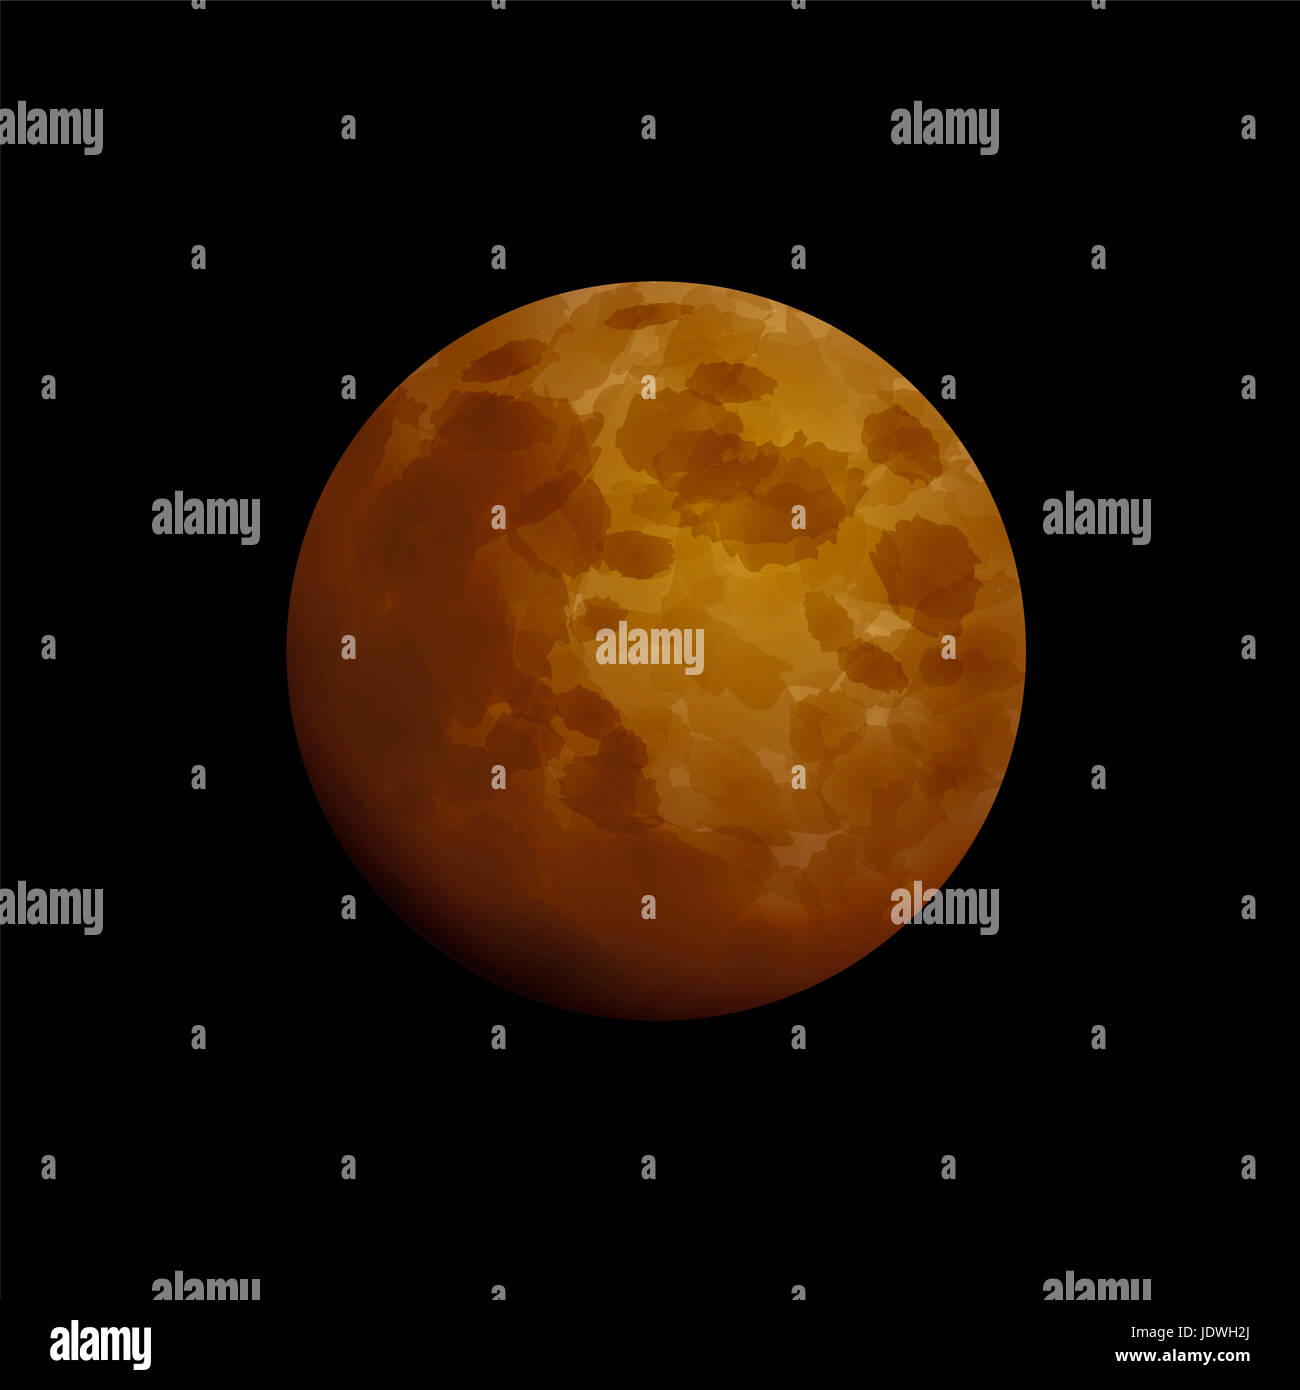 Blood moon, total lunar eclipse - artistic illustration of an orange red moon that occurs when the sun, earth, and moon are aligned exactly. Stock Photo